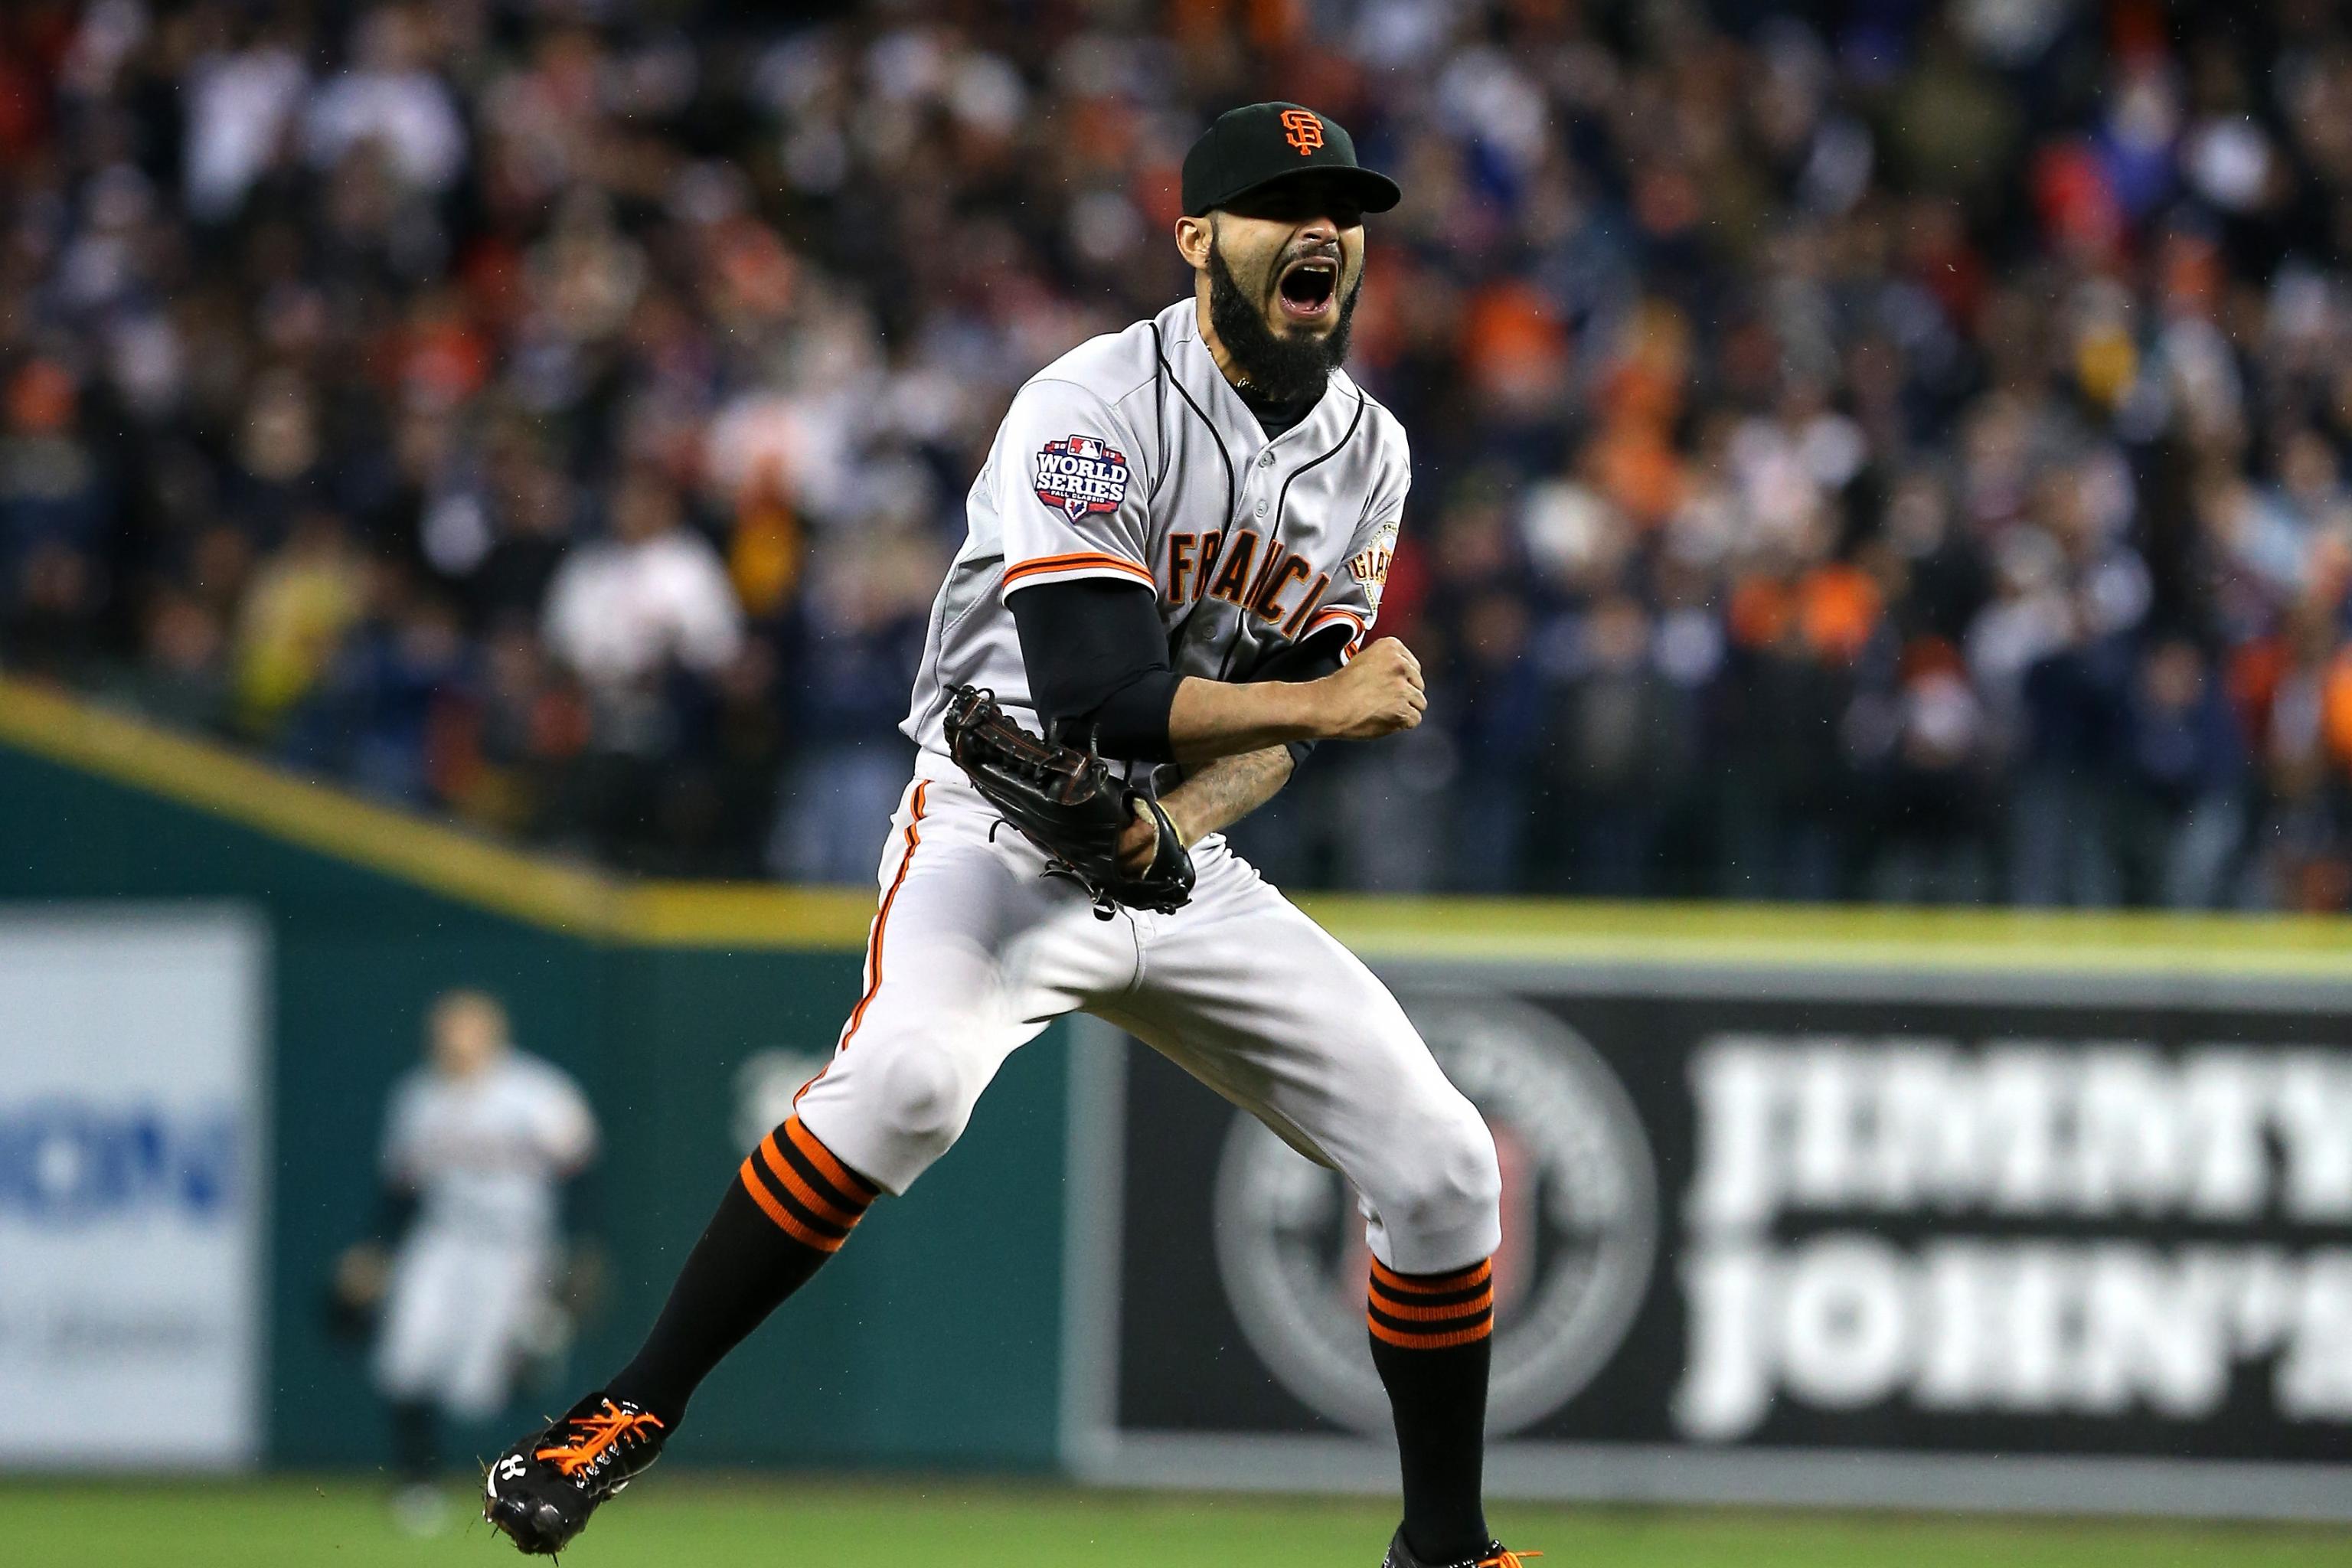 Sergio Romo gets emotional over retirement with Giants